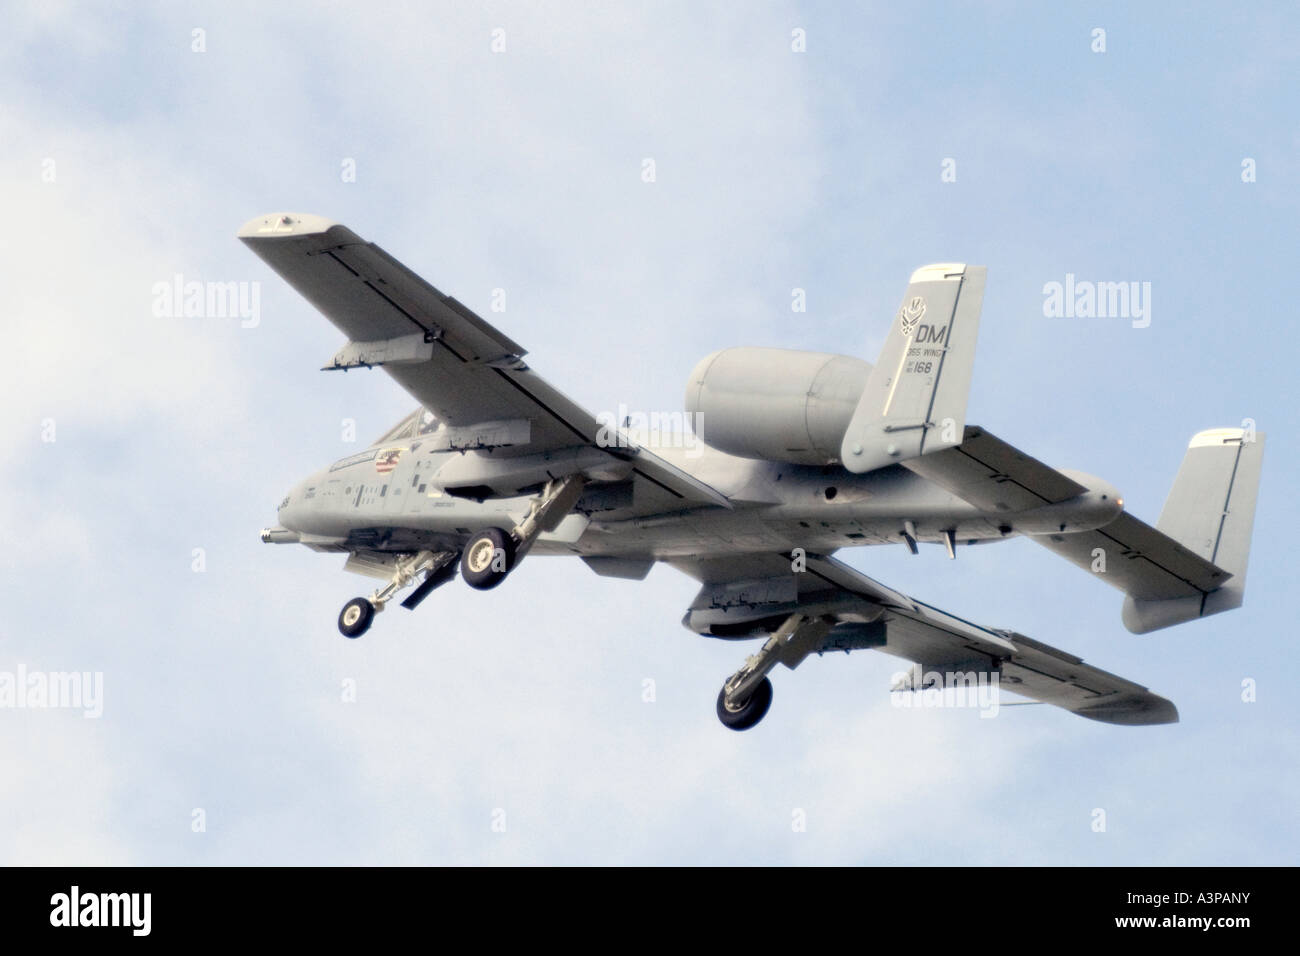 An A-10 Thunderbolt, also known as 'Warthog,' shows it undercarriage during takeoff Stock Photo